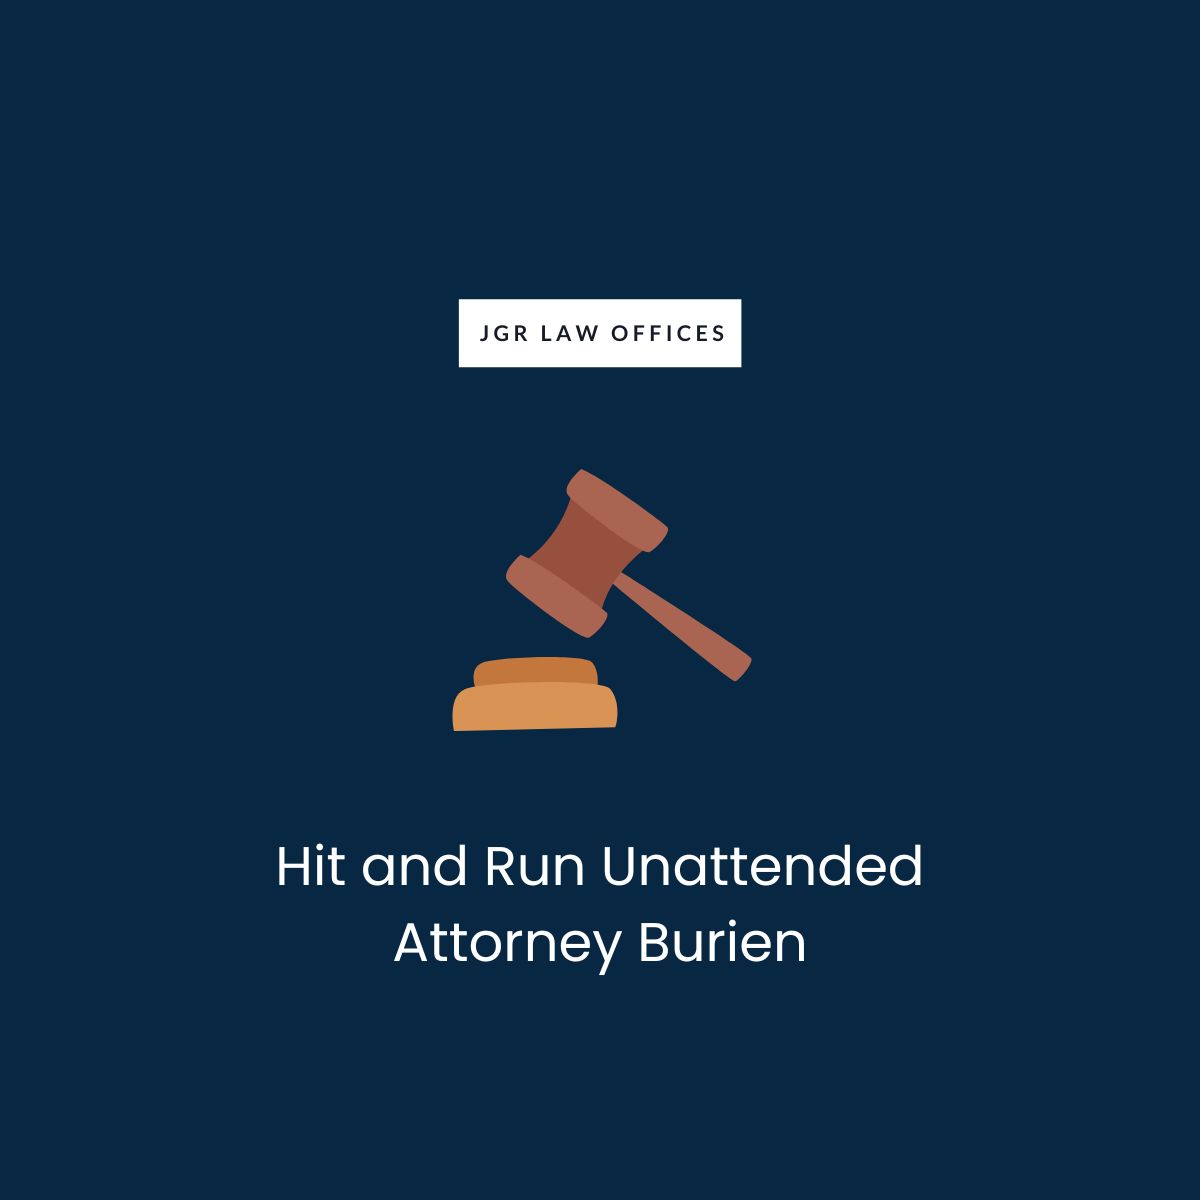 Hit and Run Unattended Lawyer Burien Hit and Run Unattended Hit and Run Unattended